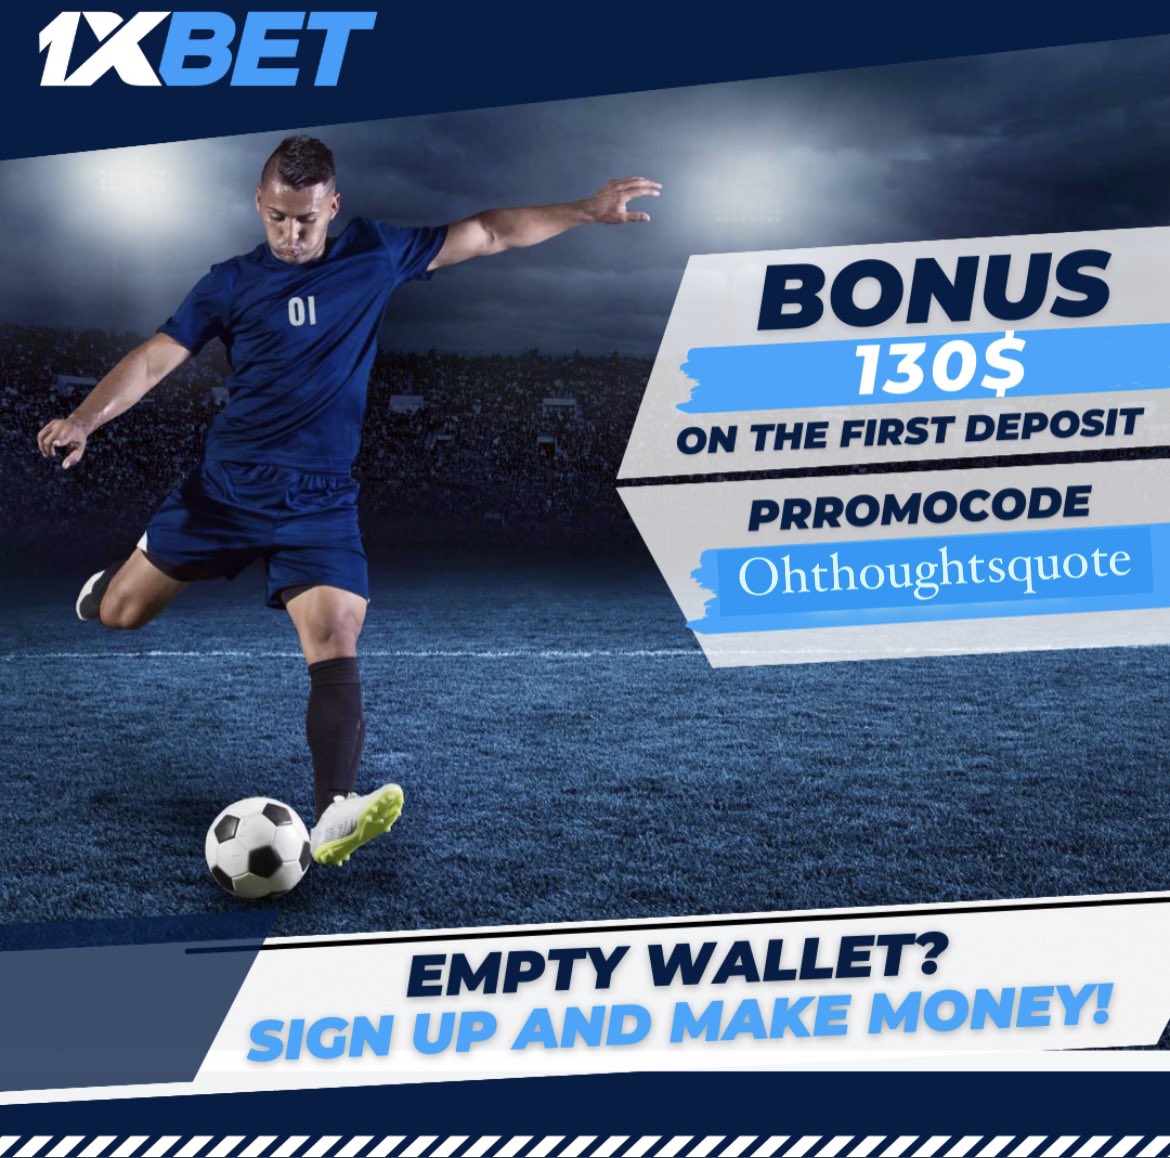 Sick And Tired Of Doing 1xbet สล็อต The Old Way? Read This